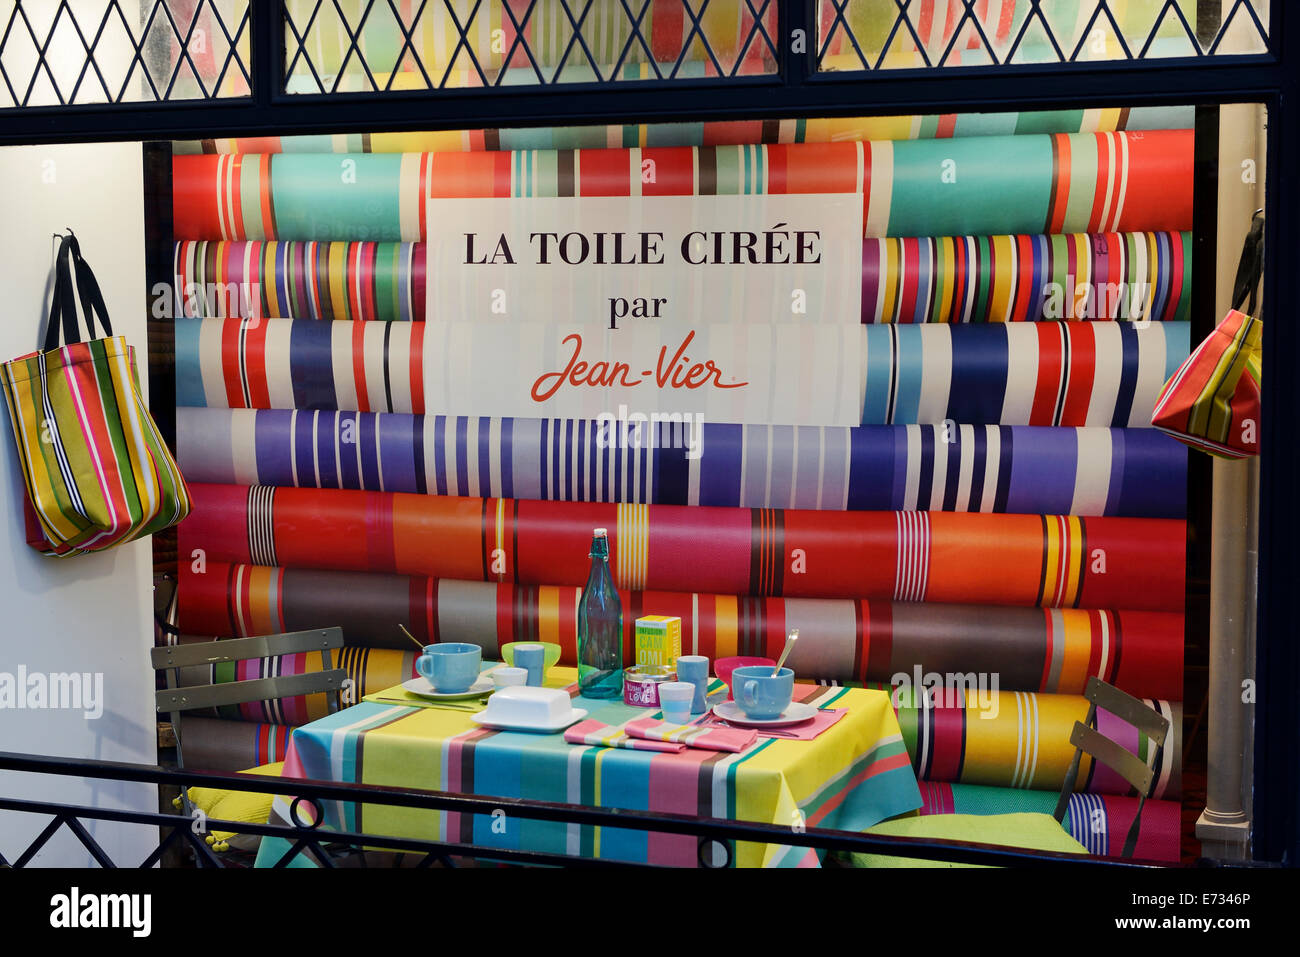 France, Basque Country, Bayonne, display of a shop selling the oilcloth by Jean  Vier Stock Photo - Alamy